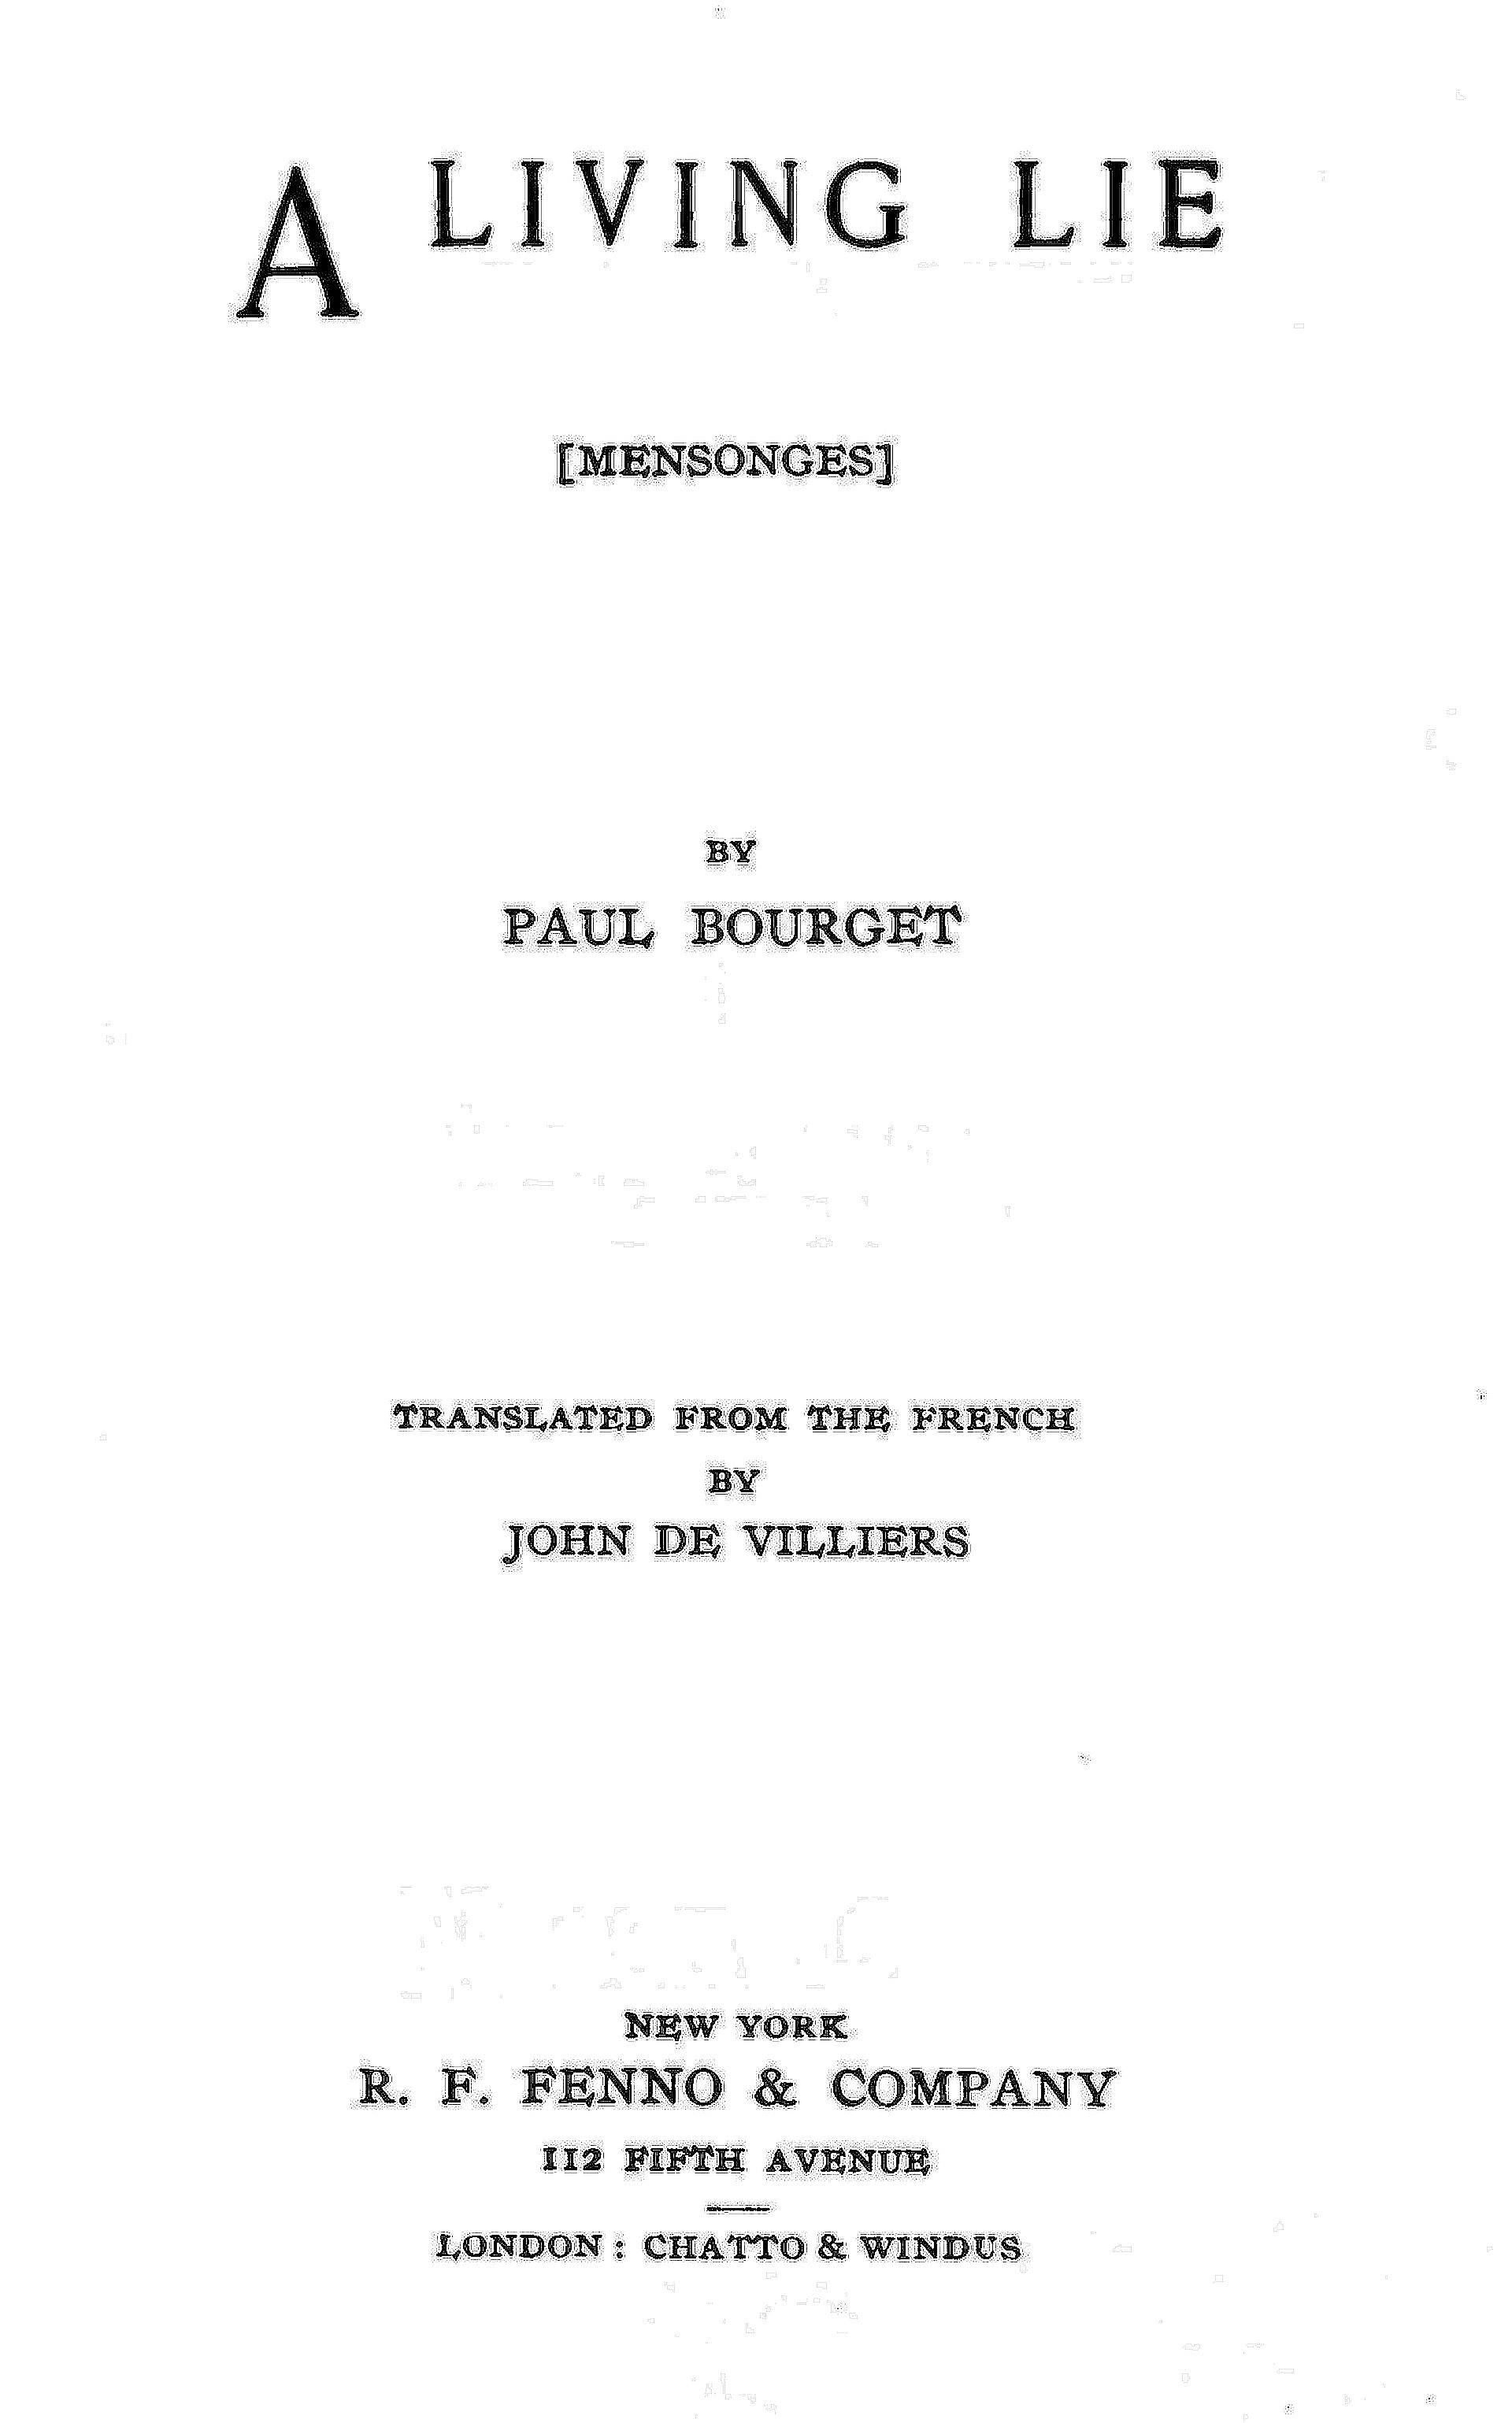 The Project Gutenberg eBook of A Living Lie, by Paul Bourget. picture